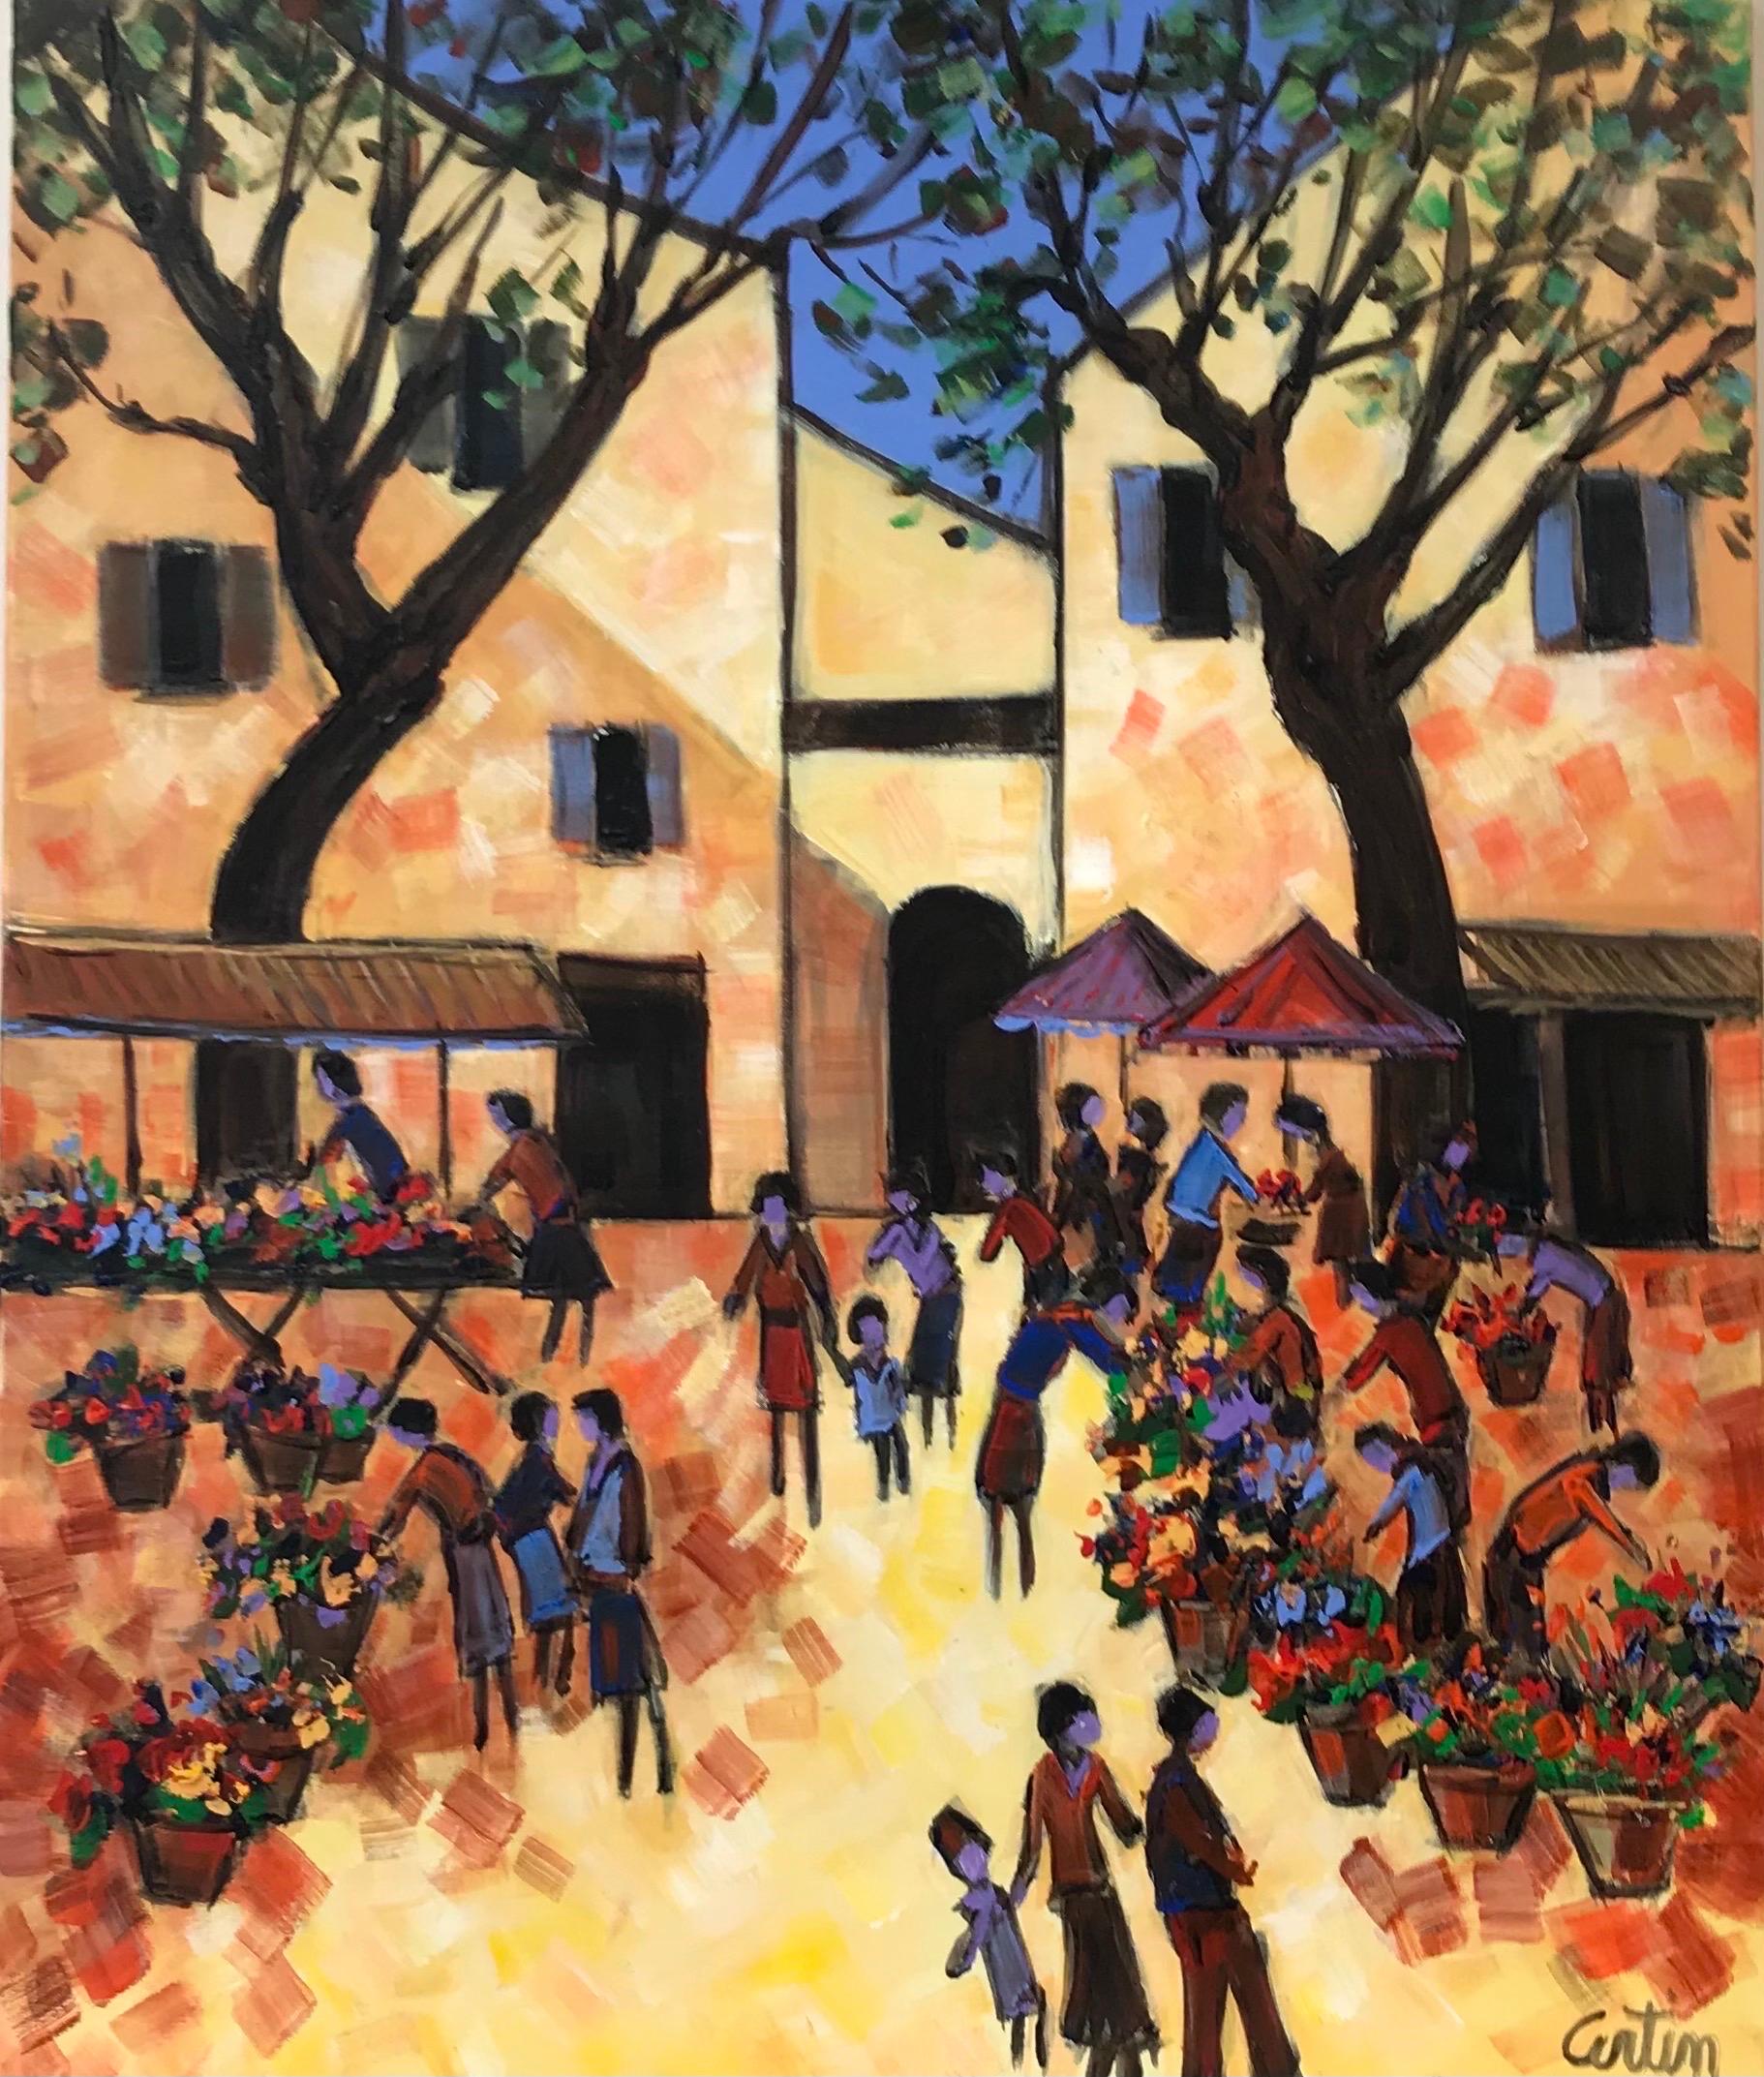 French School Landscape Painting - Provencal Town Market Square Busy Scene with Many Figures with Flowers